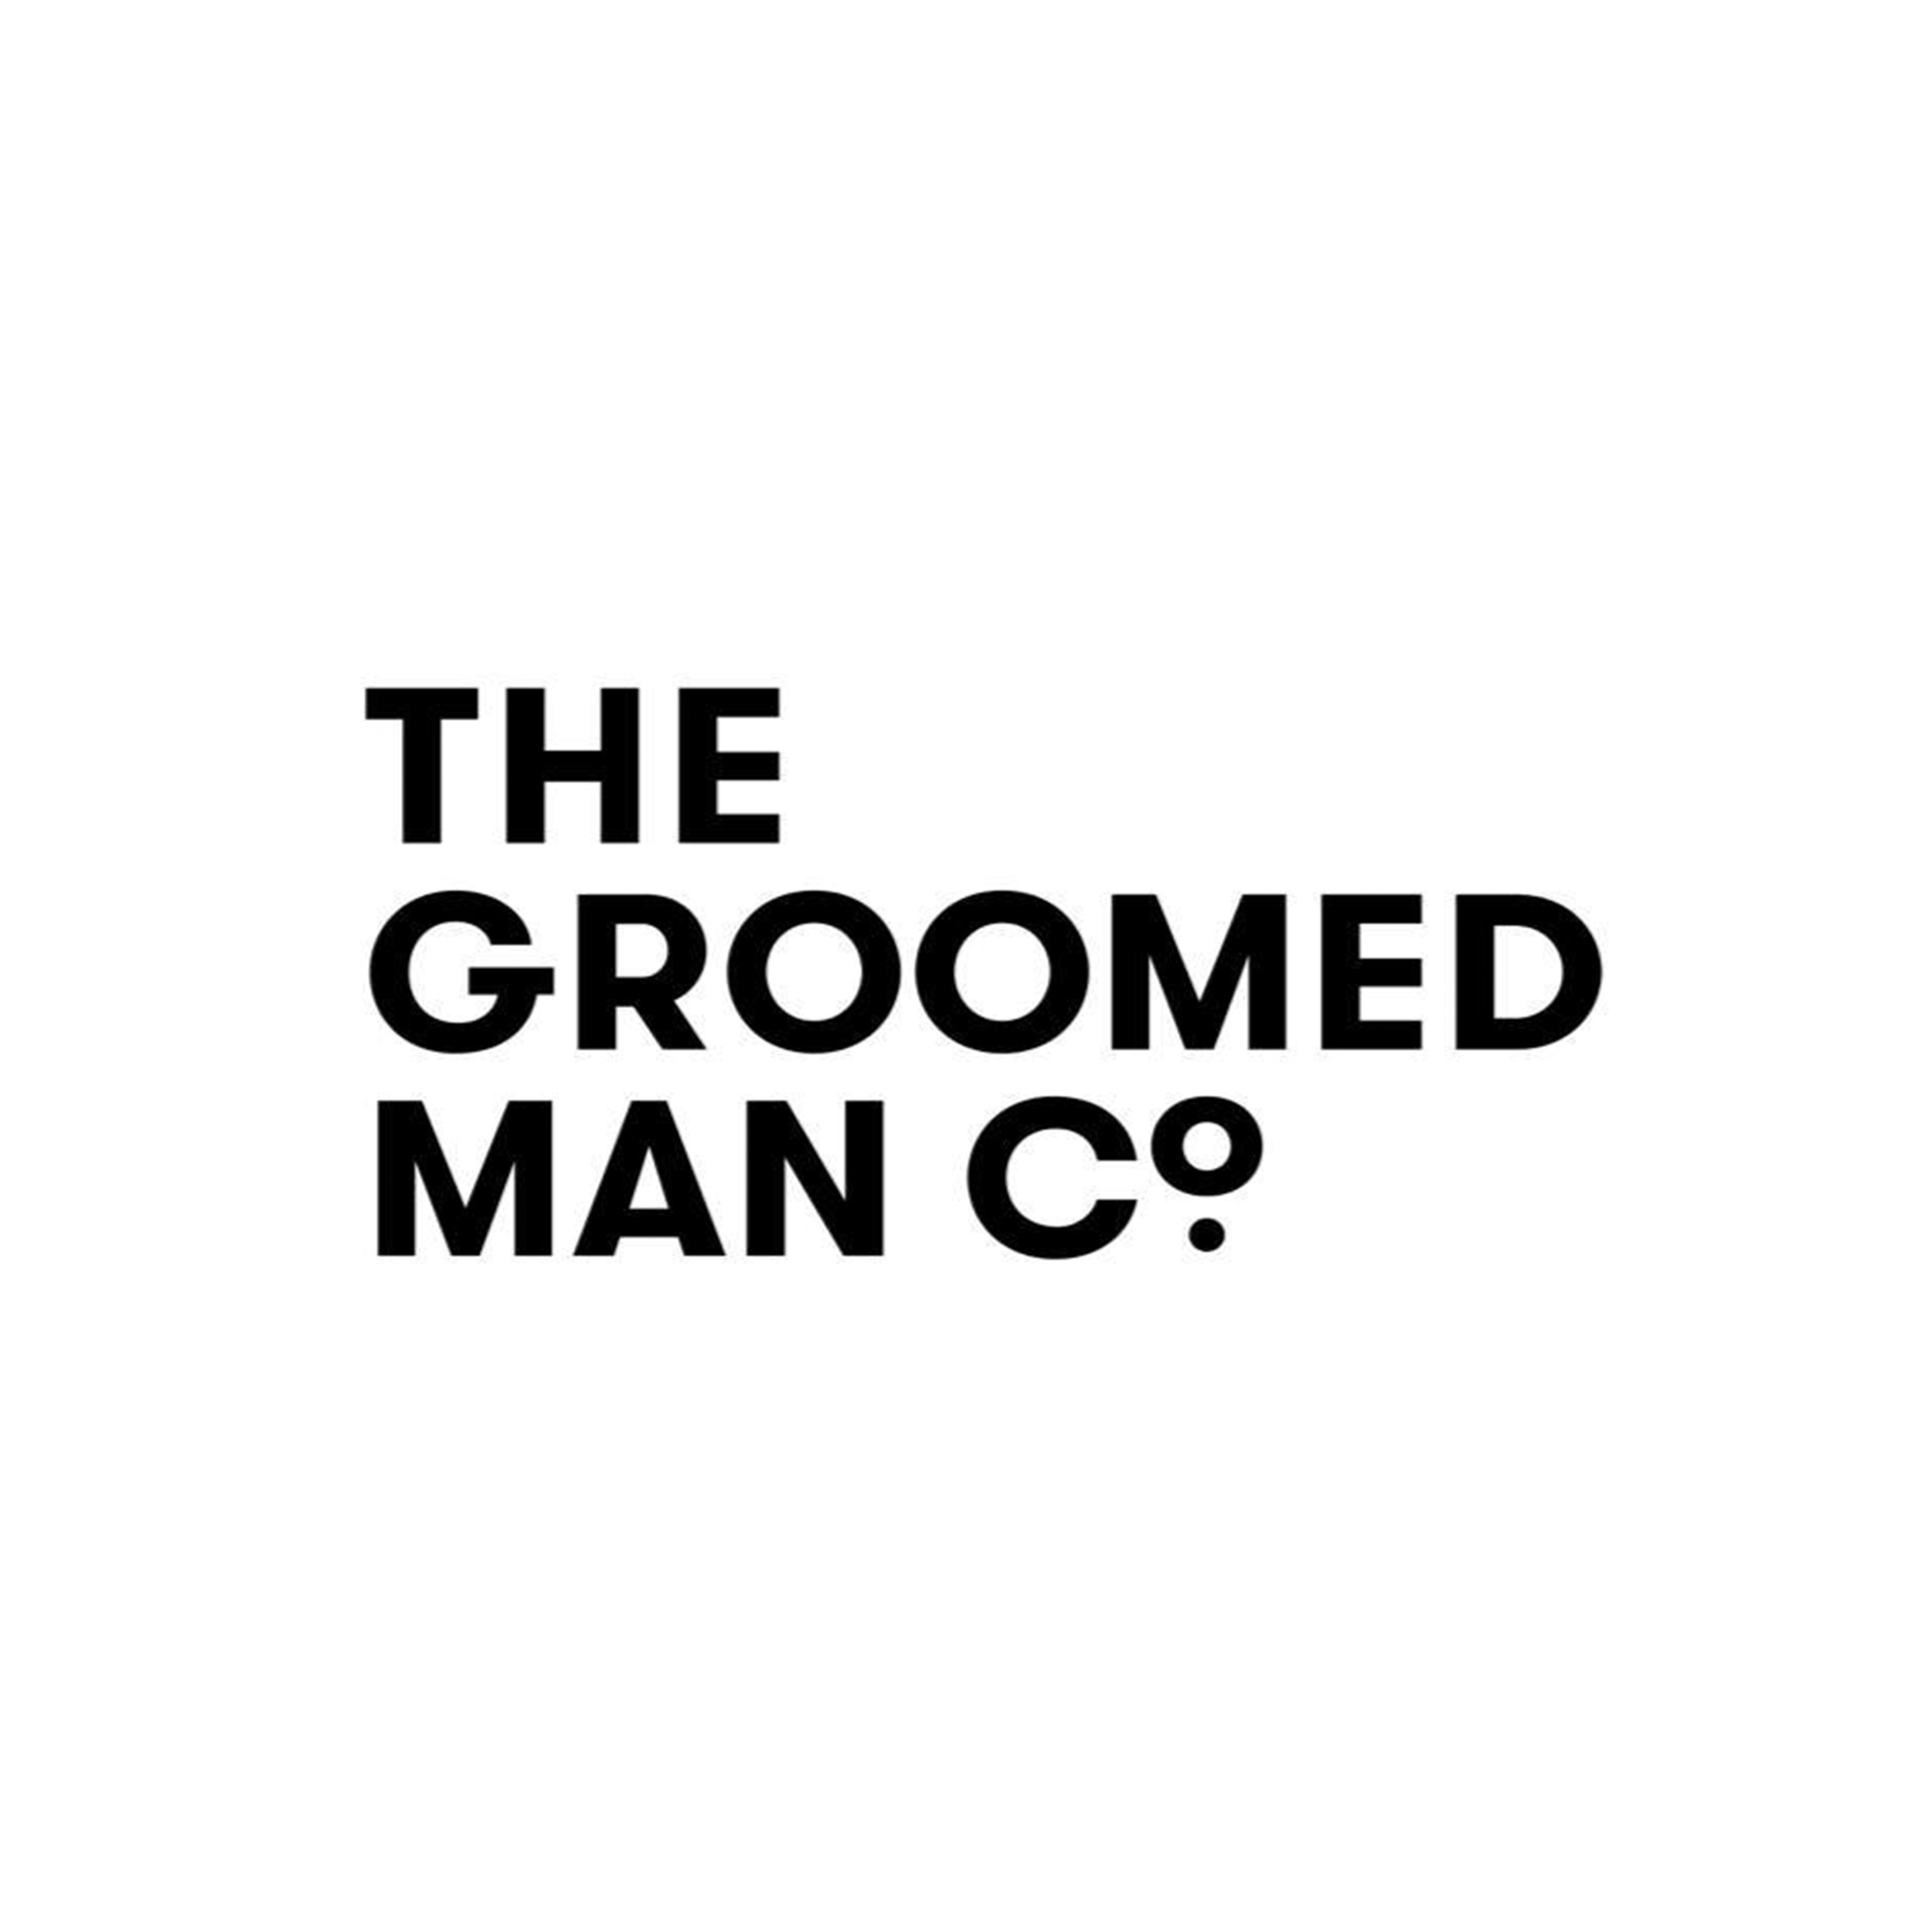 About The Groomed Man Co. — THE GROOMING LAB